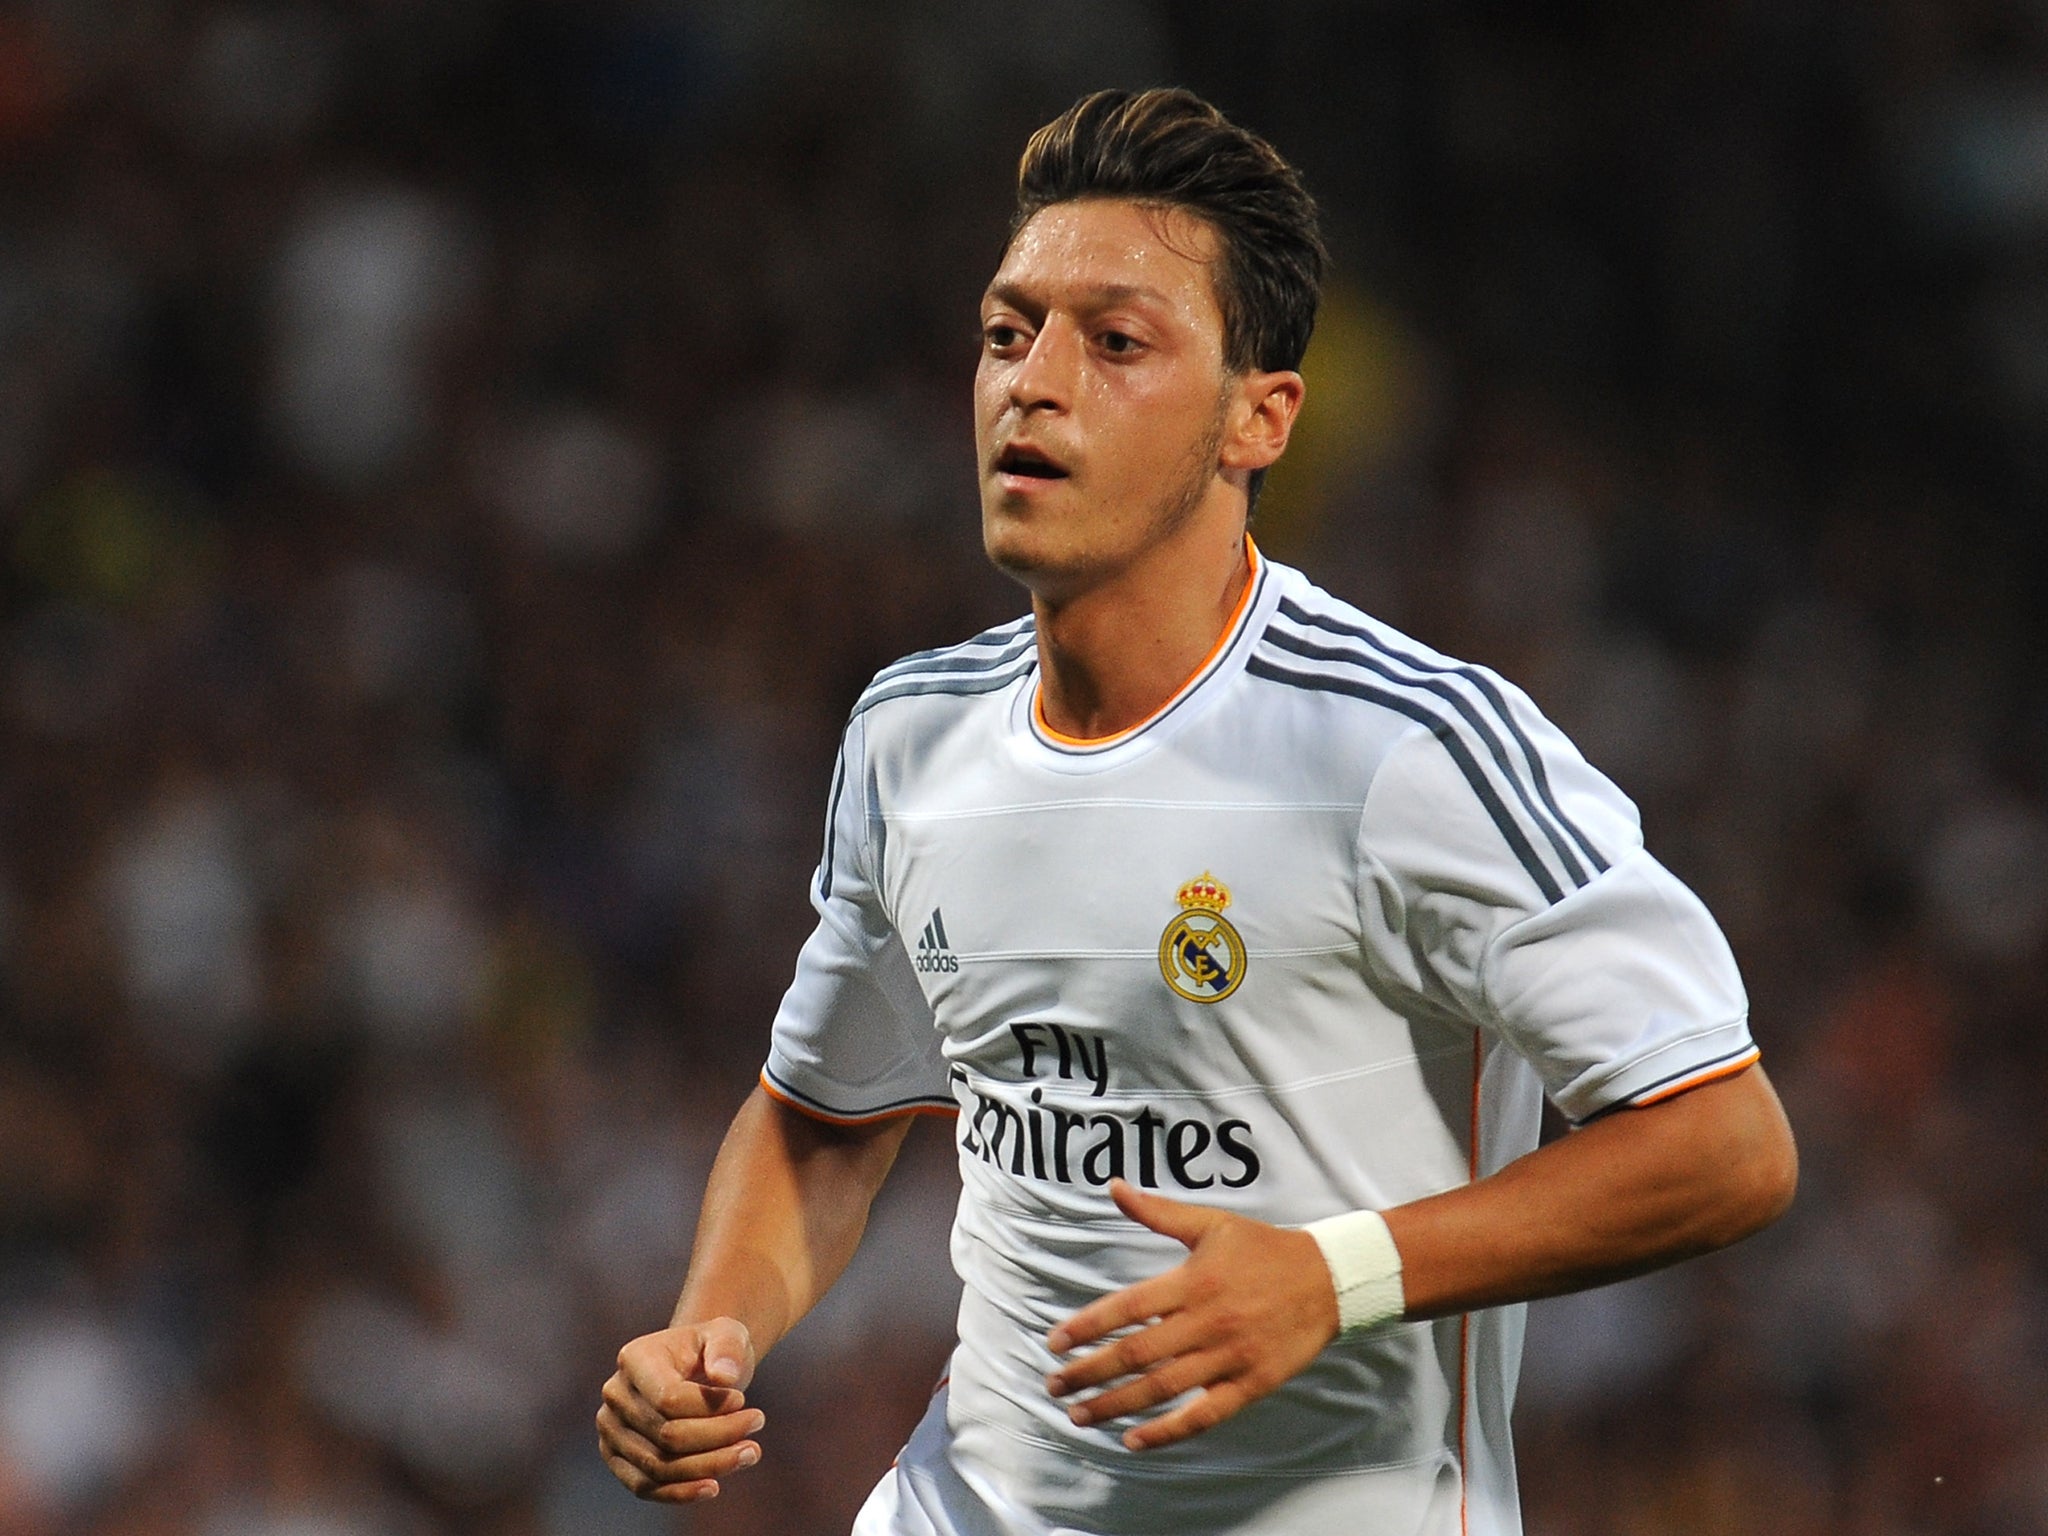 Transfer news: Manchester United offered Real Madrid midfielder Mesut Ozil  for £40m to fund Gareth Bale move - reports, The Independent